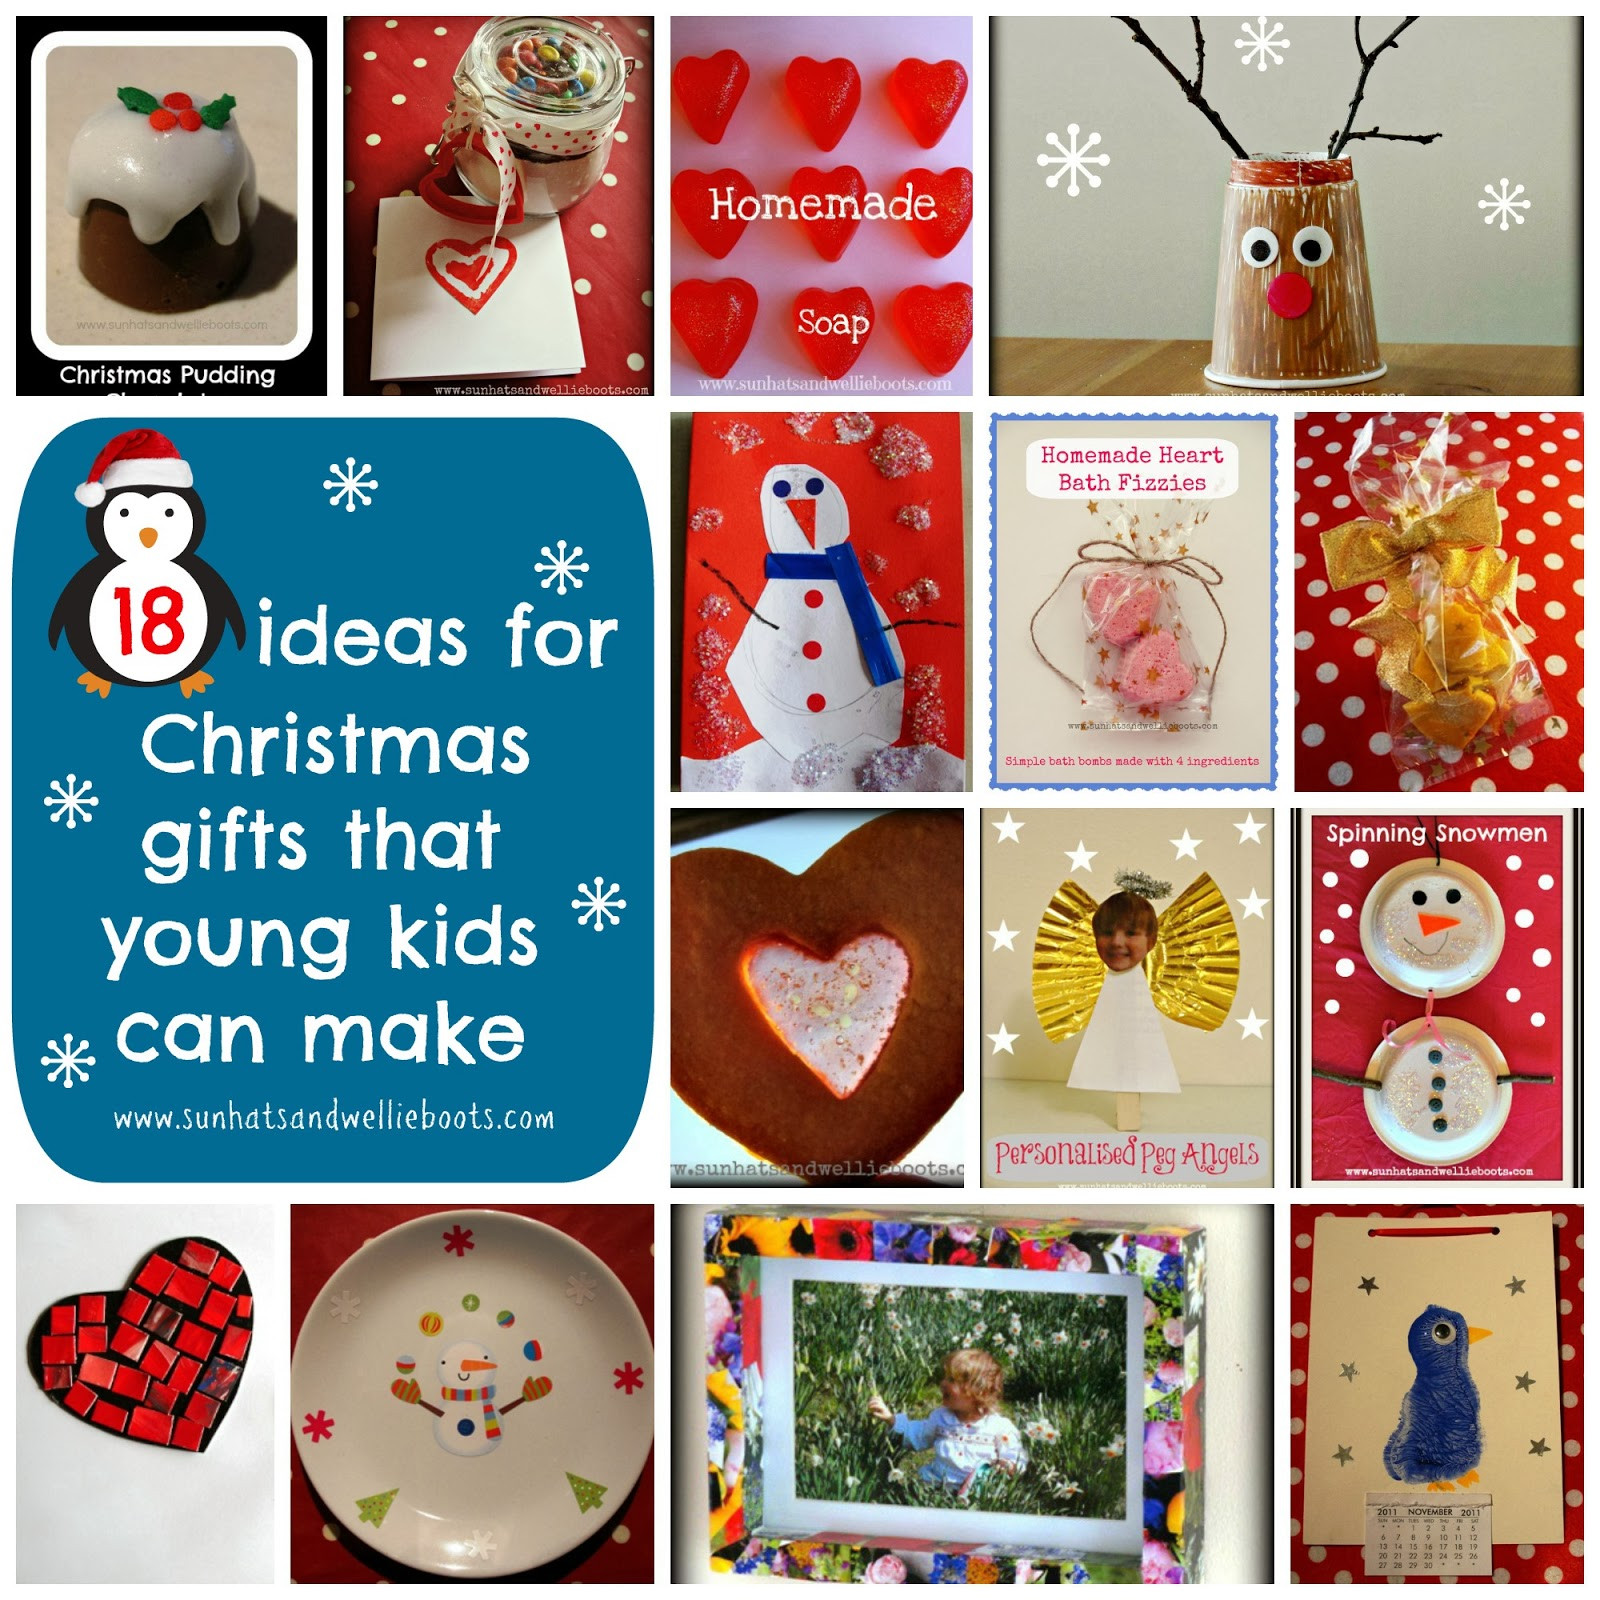 DIY Kids Christmas Gifts
 Sun Hats & Wellie Boots 18 Homemade Christmas Gifts That